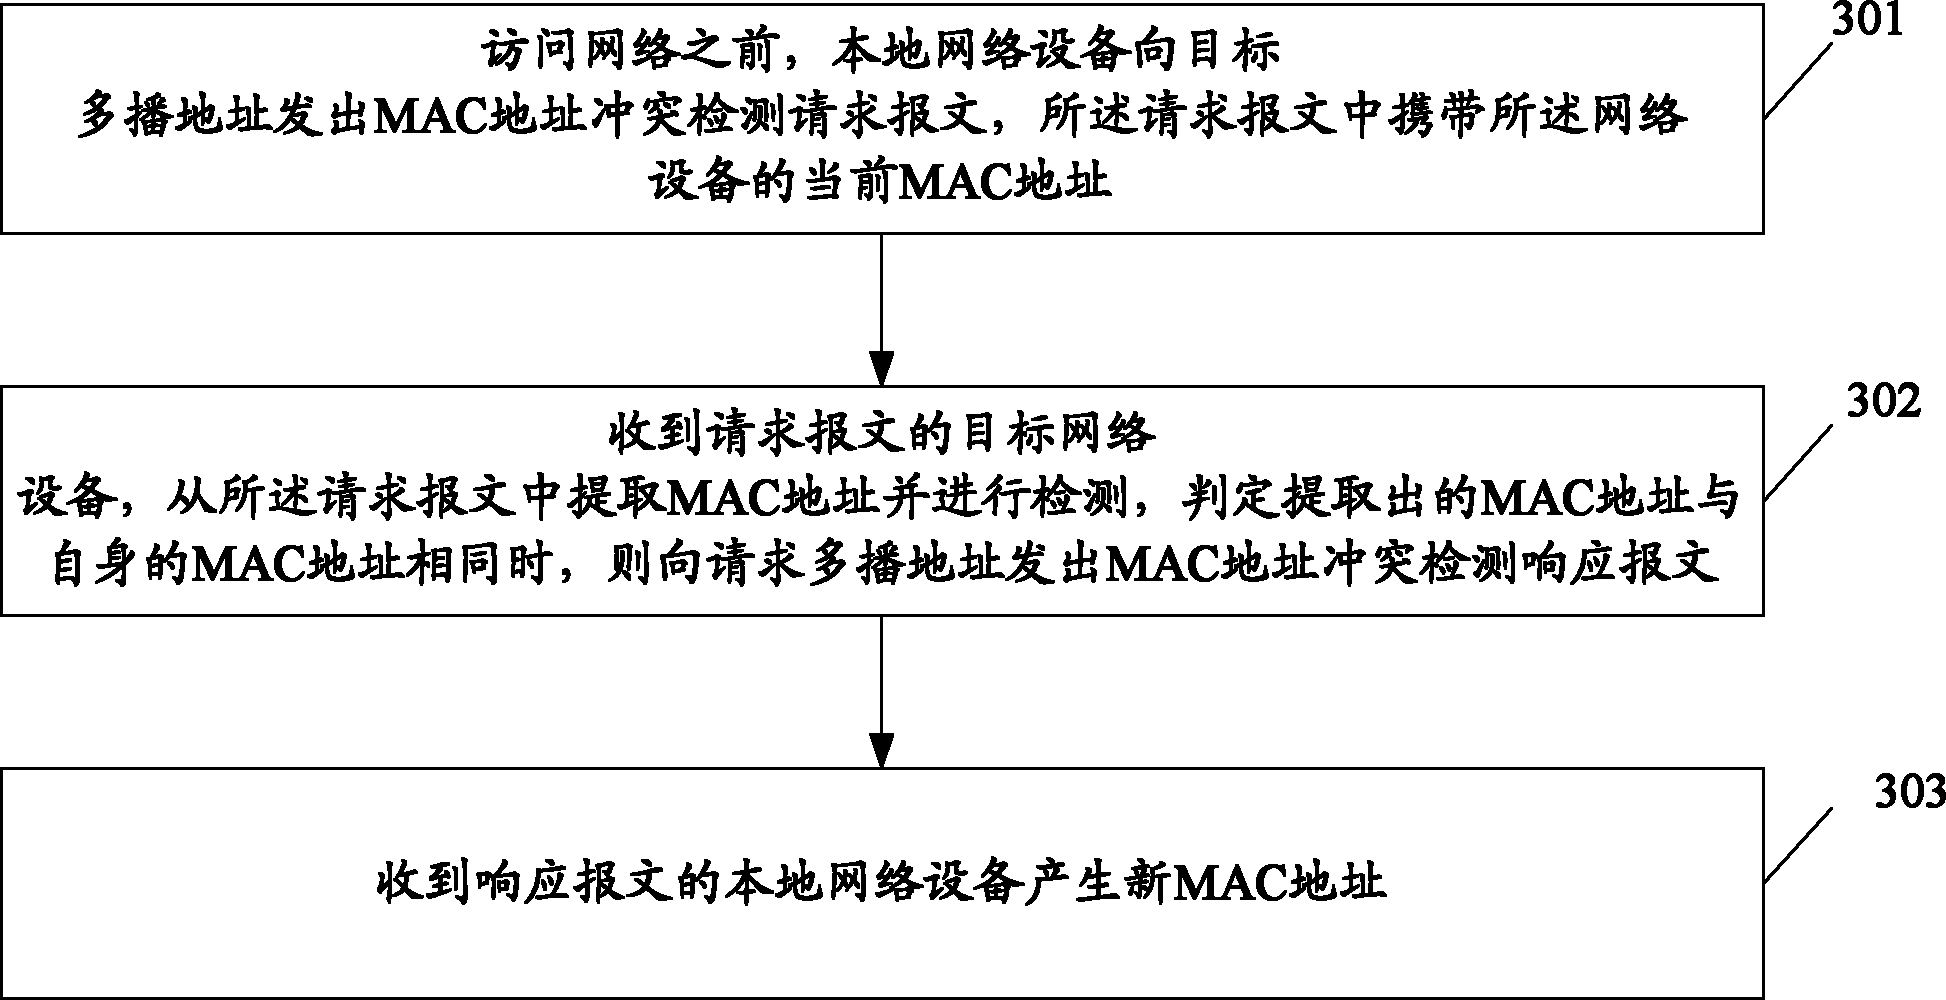 Medium/media access control address conflict detection method, device and system